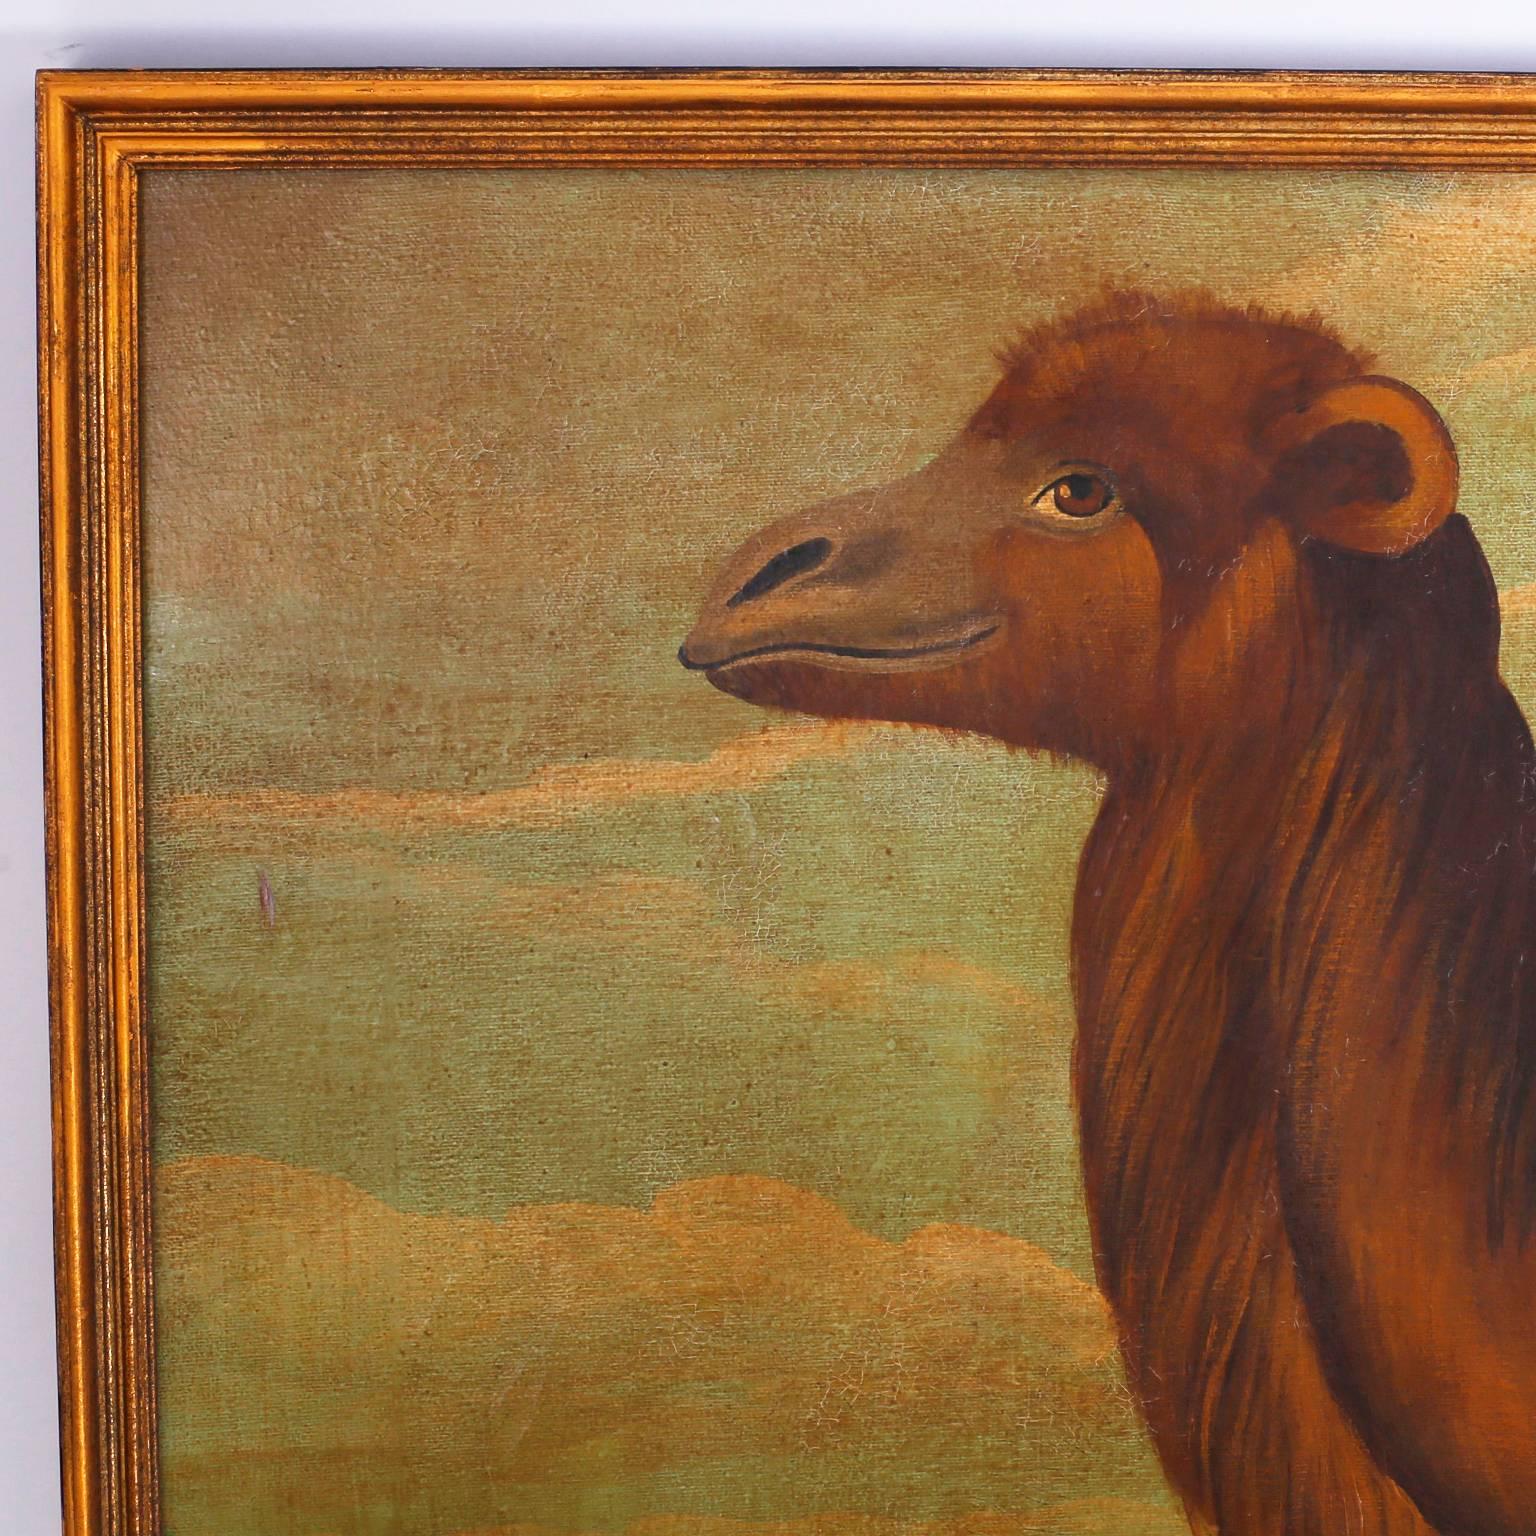 Bold oil painting on canvas of a camel in a desert landscape complete with pyramids. Painted in an amusing style that has a tongue in cheek reference to Victorian parlour paintings with contrived aging.
This camel seems to be hiding a secret.